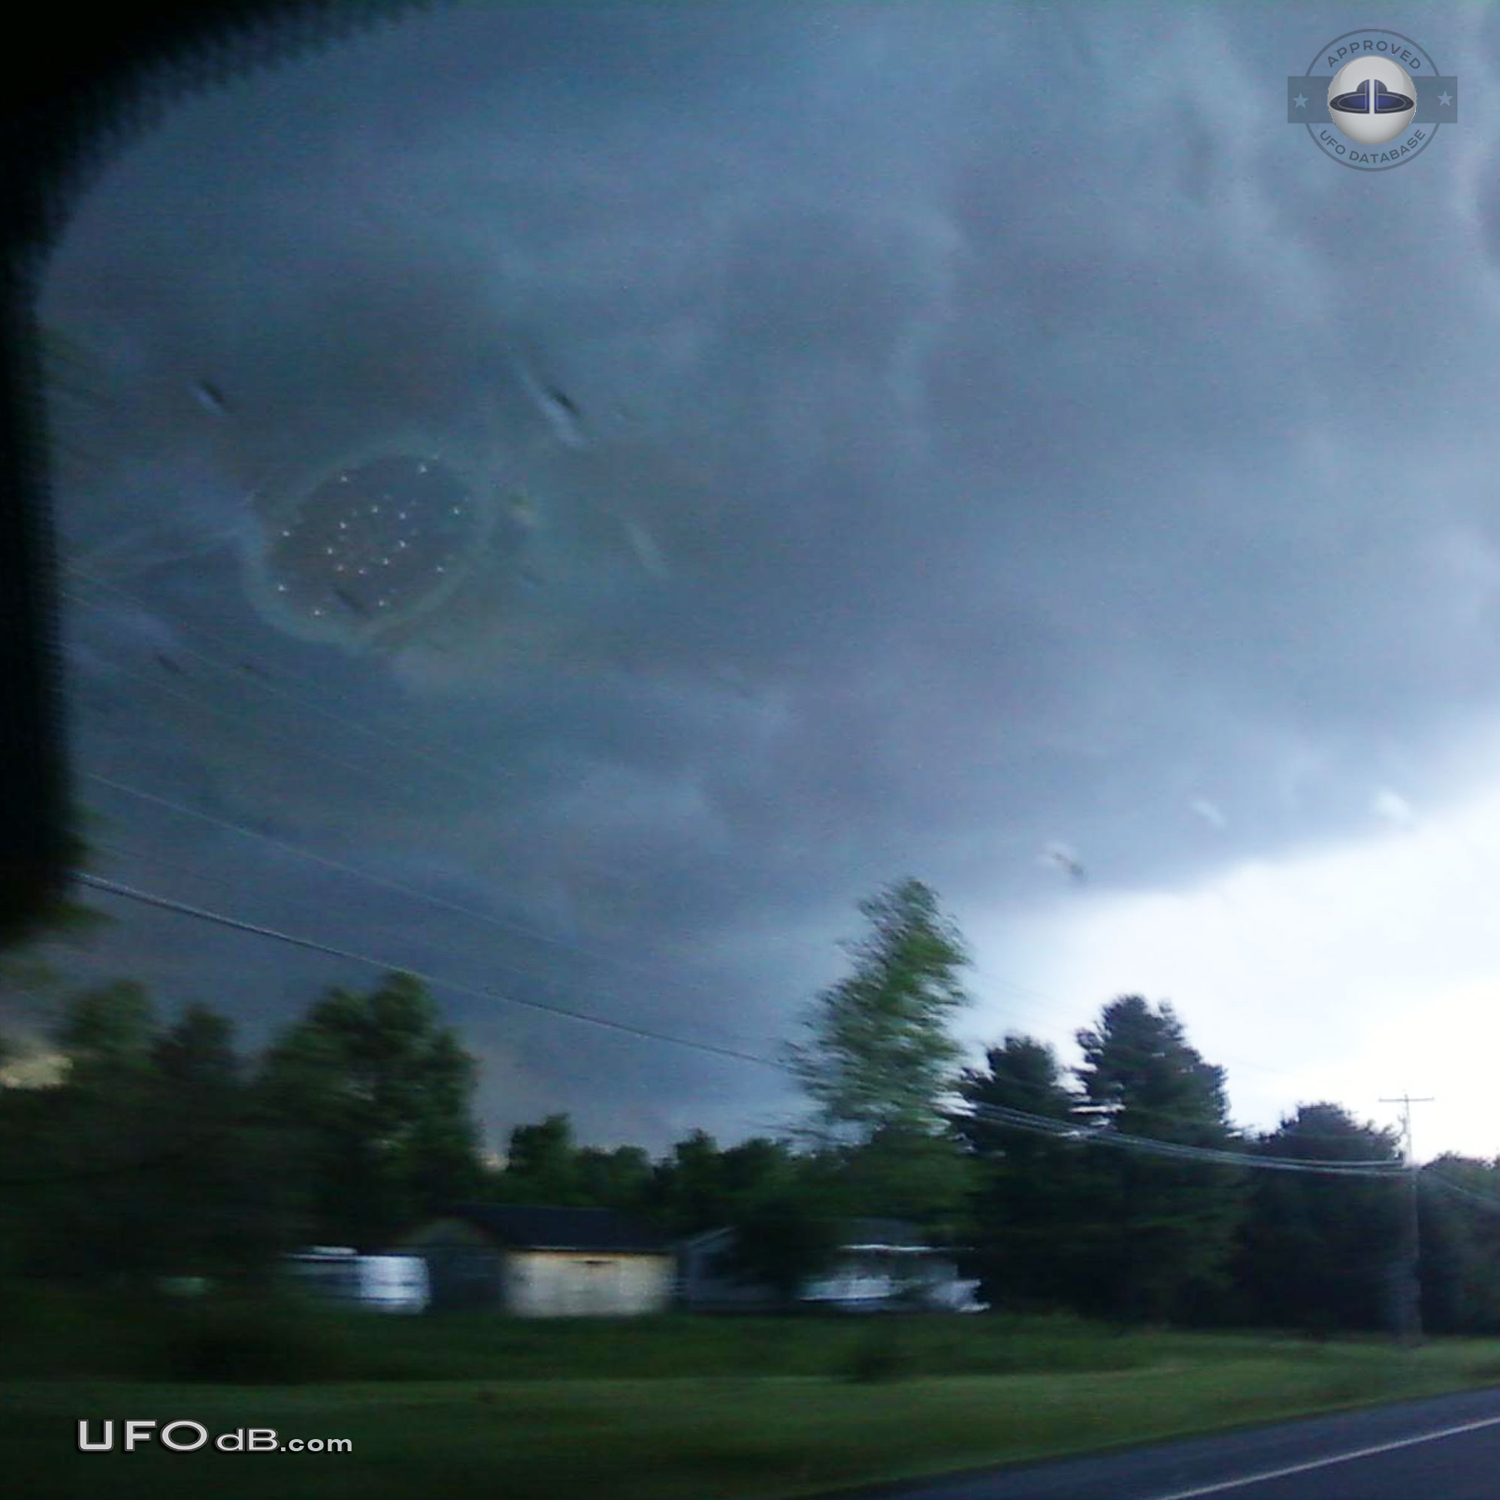 Large saucer ufo appears through dark stormy clouds - Malone, New York UFO Picture #414-1